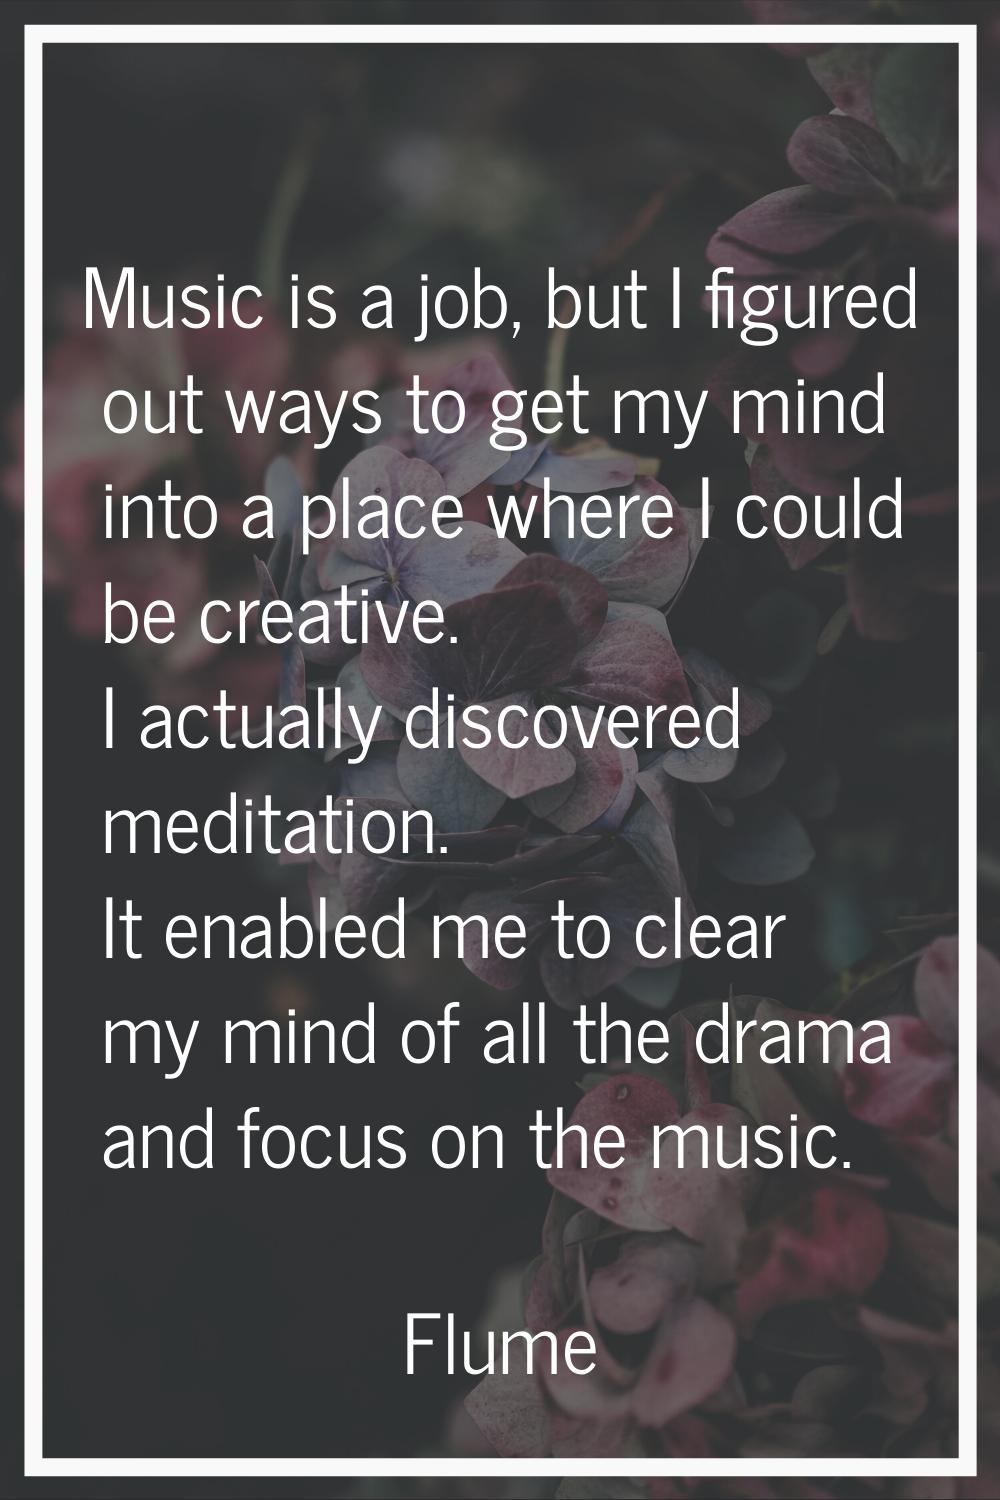 Music is a job, but I figured out ways to get my mind into a place where I could be creative. I act